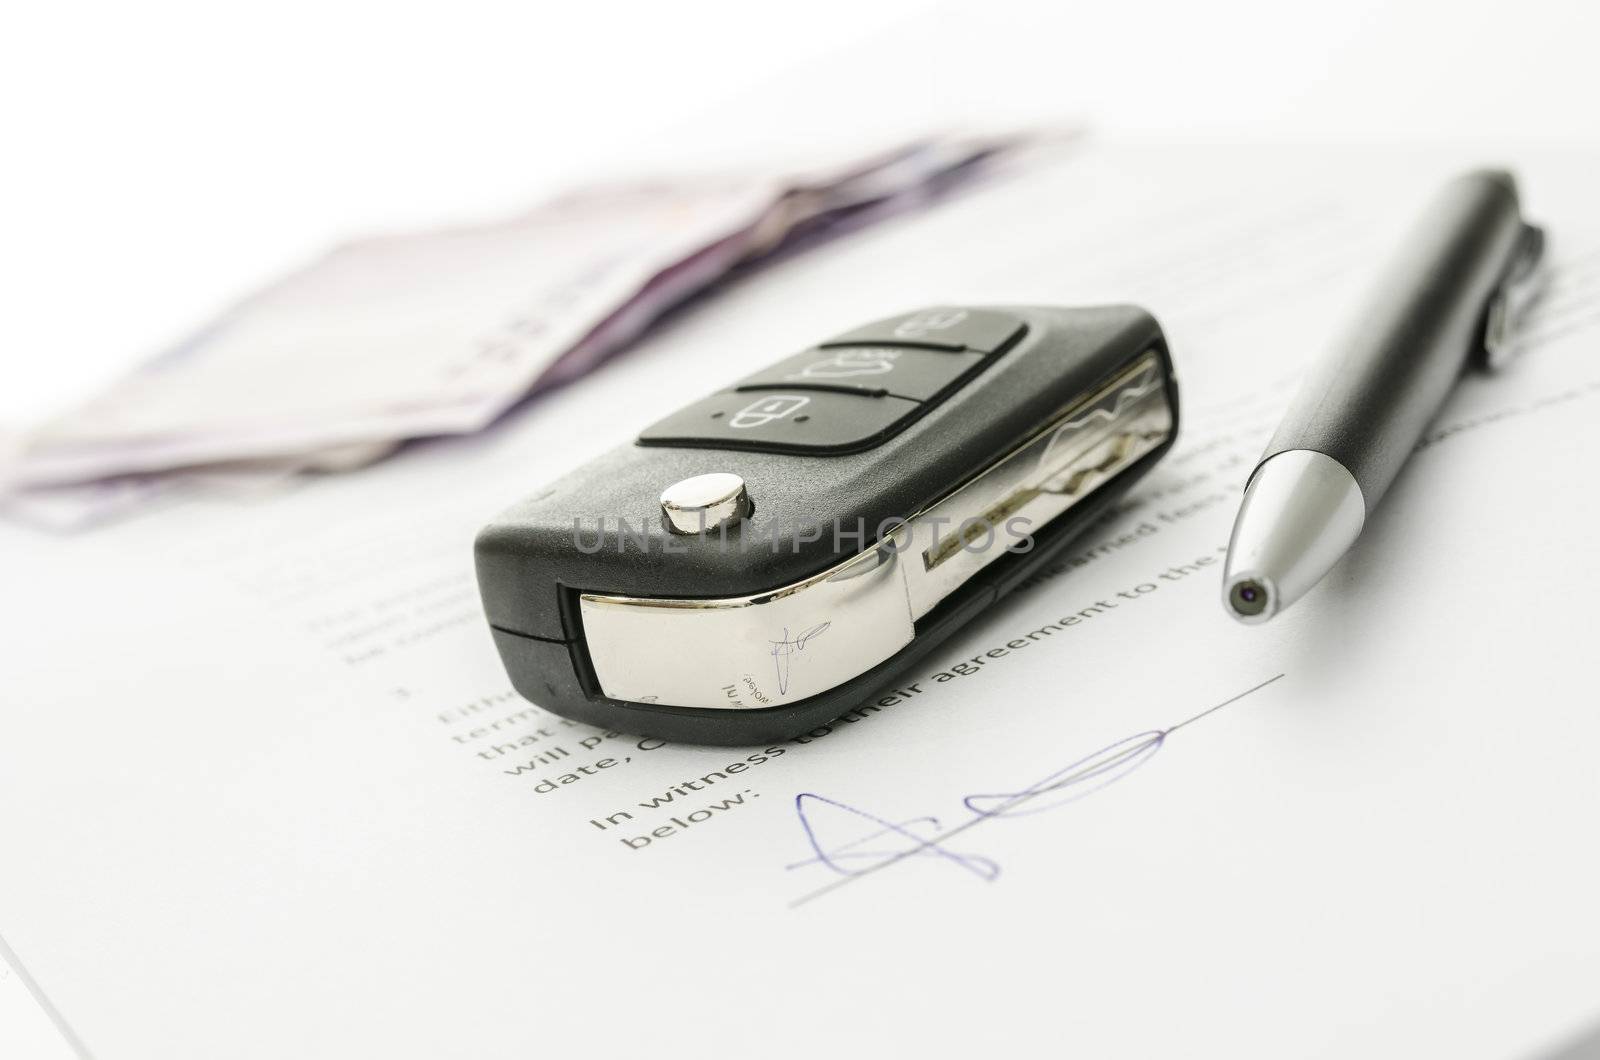 Black car key and money on a signed contract of car sale.  Focus on a key.